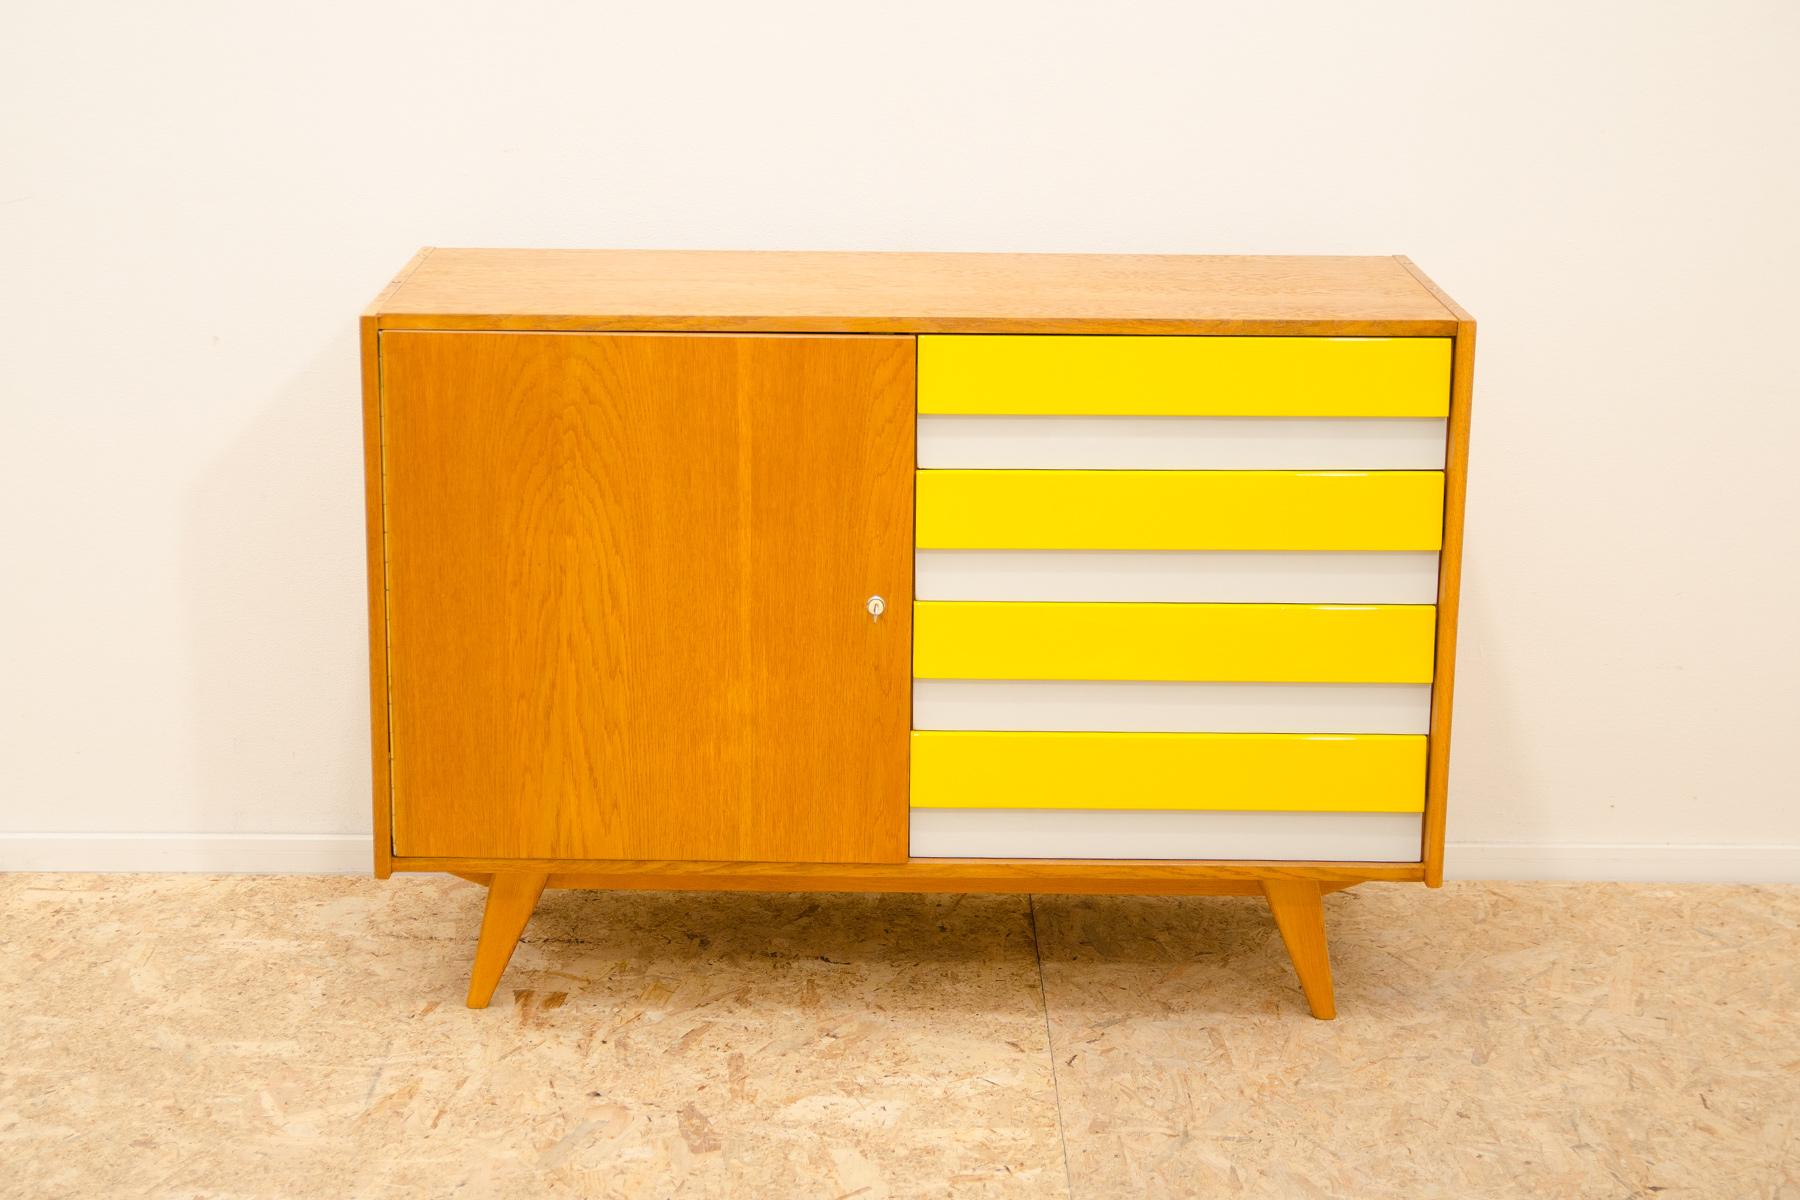 Mid-century chest of drawers, model no. U-458, designed by Jiri Jiroutek. It was made in the 1960´s and produced by “Interier Praha”. This model associated with world-renowned EXPO 58-“Brussels period”. It´s made of beech wood and plywood. The chest